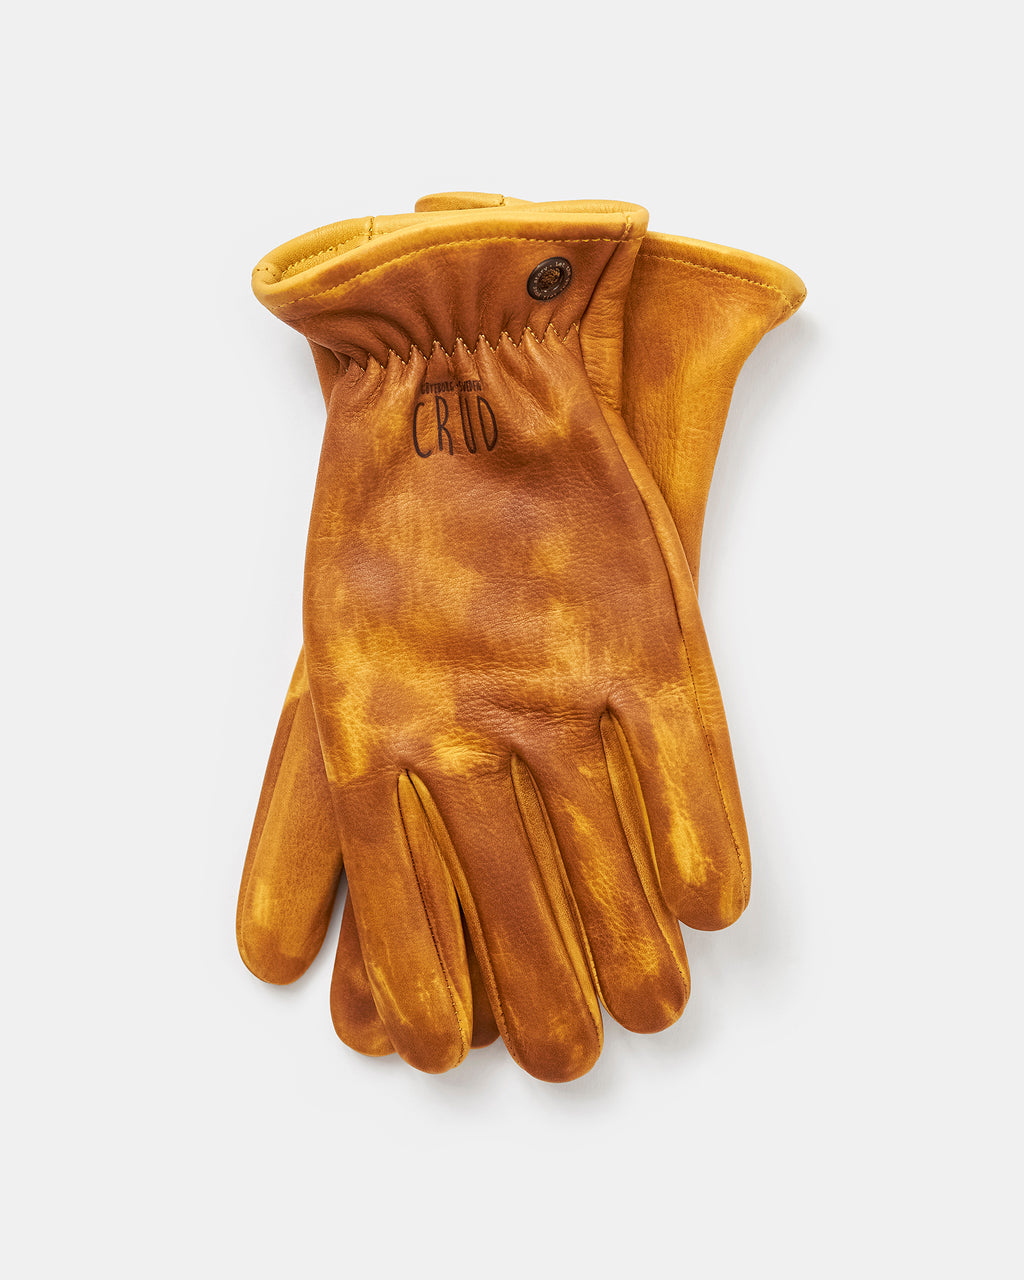 Size XL Leather Work Gloves